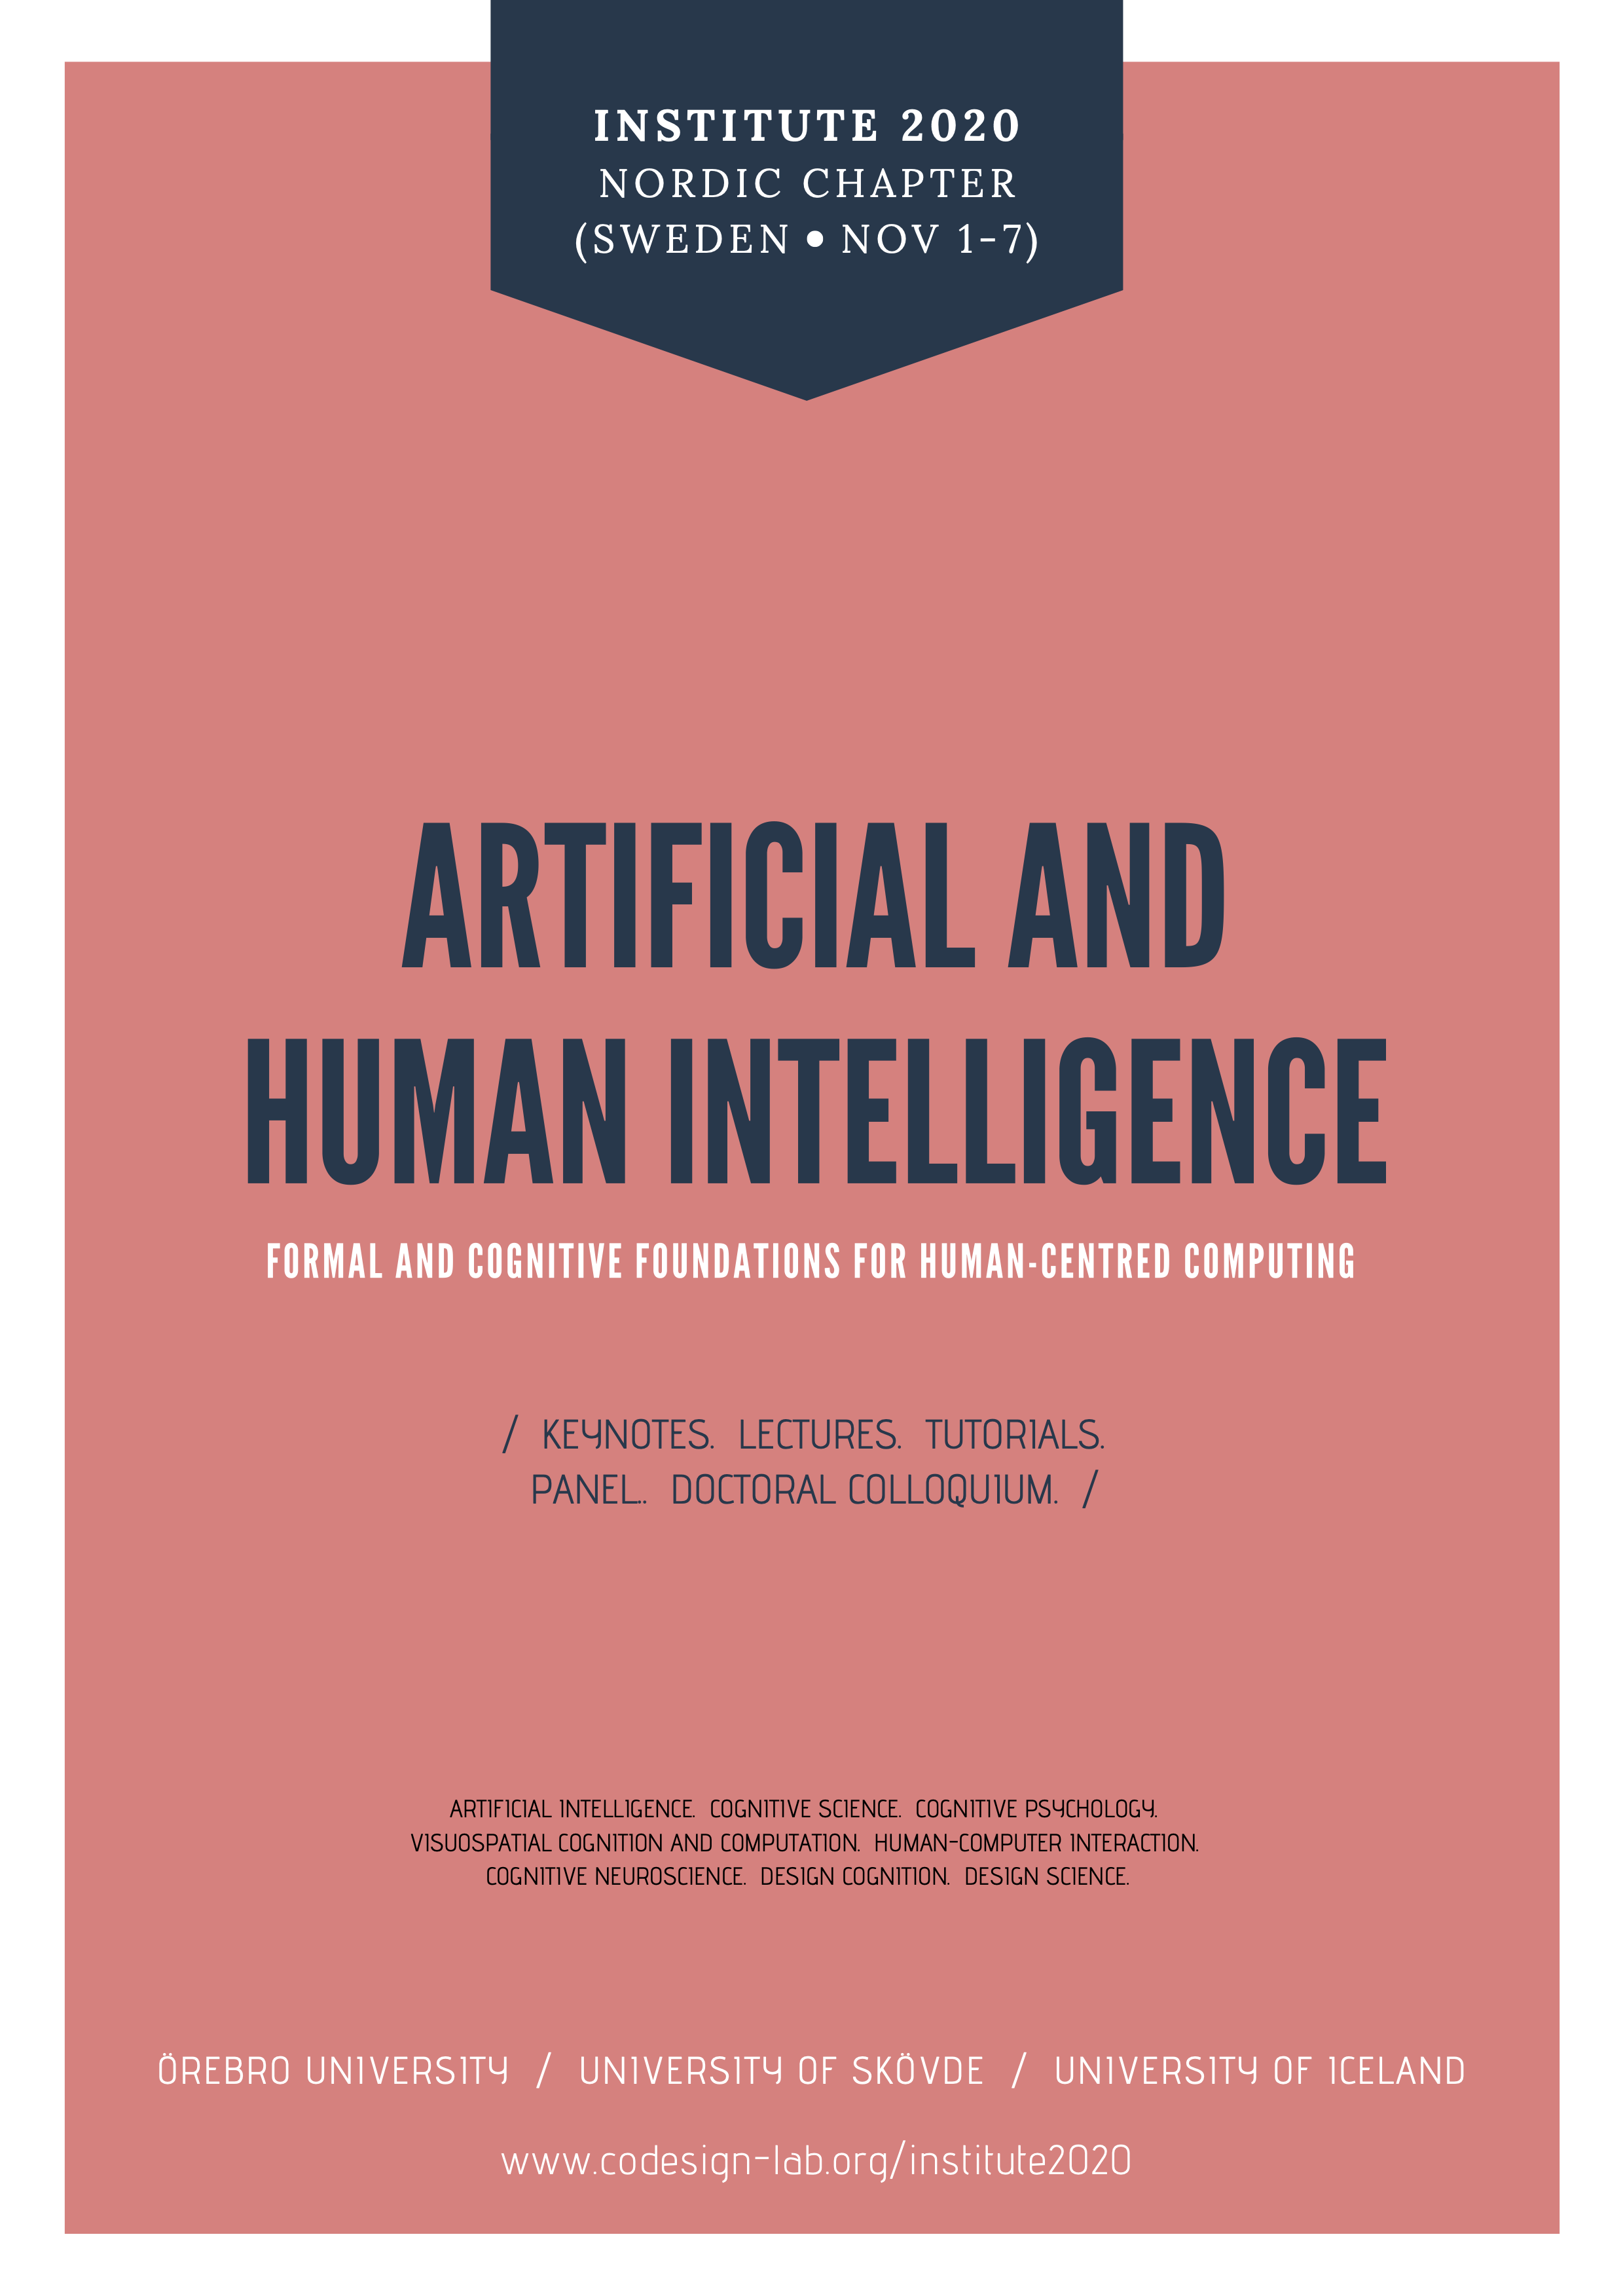 Institute 2020 / Artificial and Human Intelligence: Formal and Cognitive Foundations for Human-Centred Computing